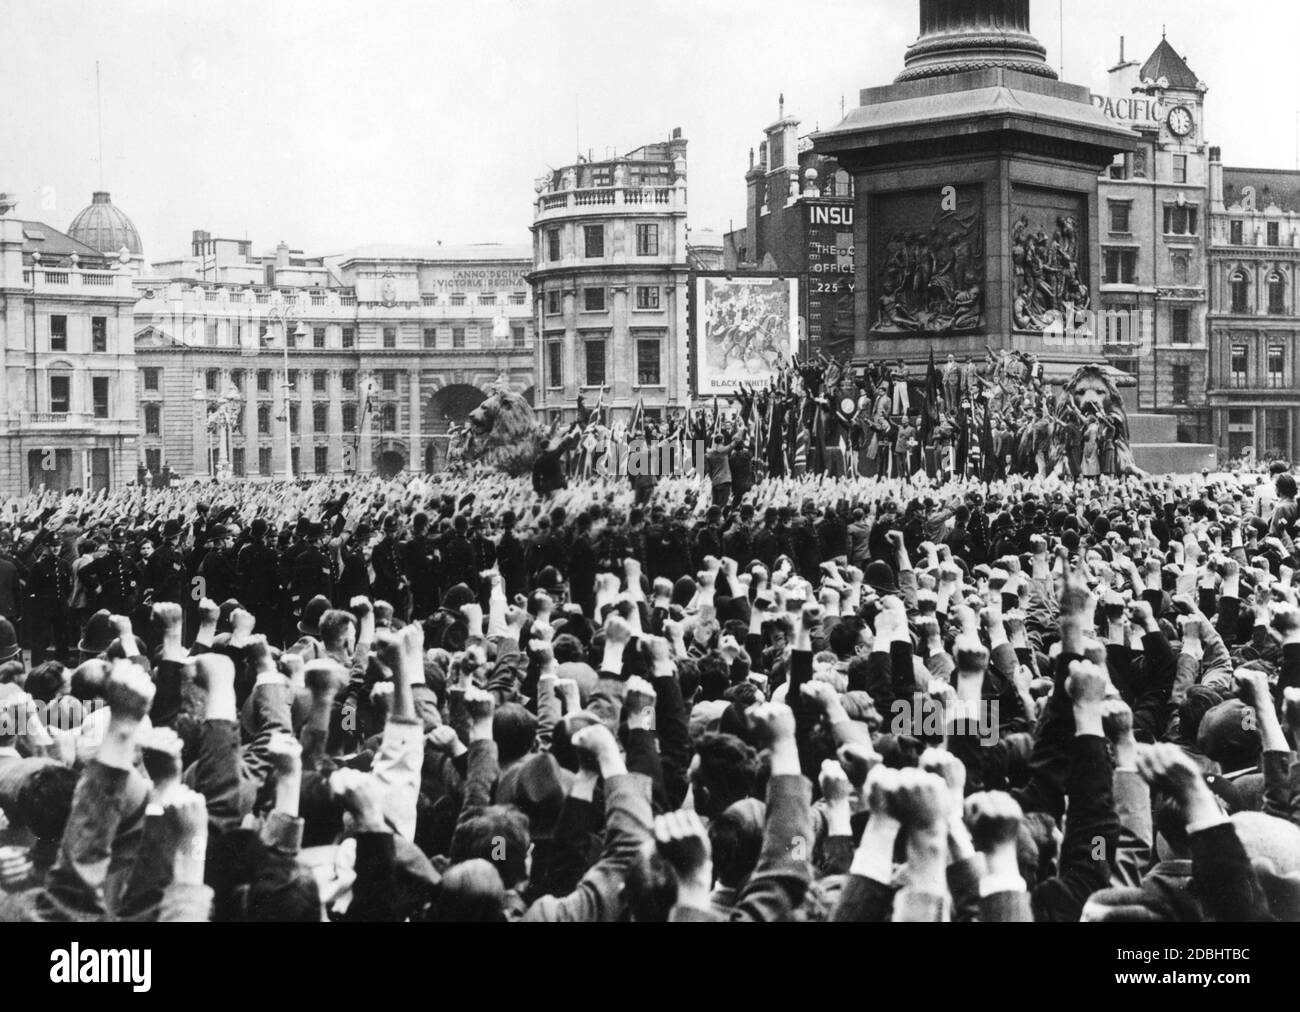 'Members of Oswald Mosley's ''British Union of Fascists'' (BUF) march on Trafalgar Square in London. Communist counter-demonstrators have gathered in front of it, their fists are raised in salute.' Stock Photo